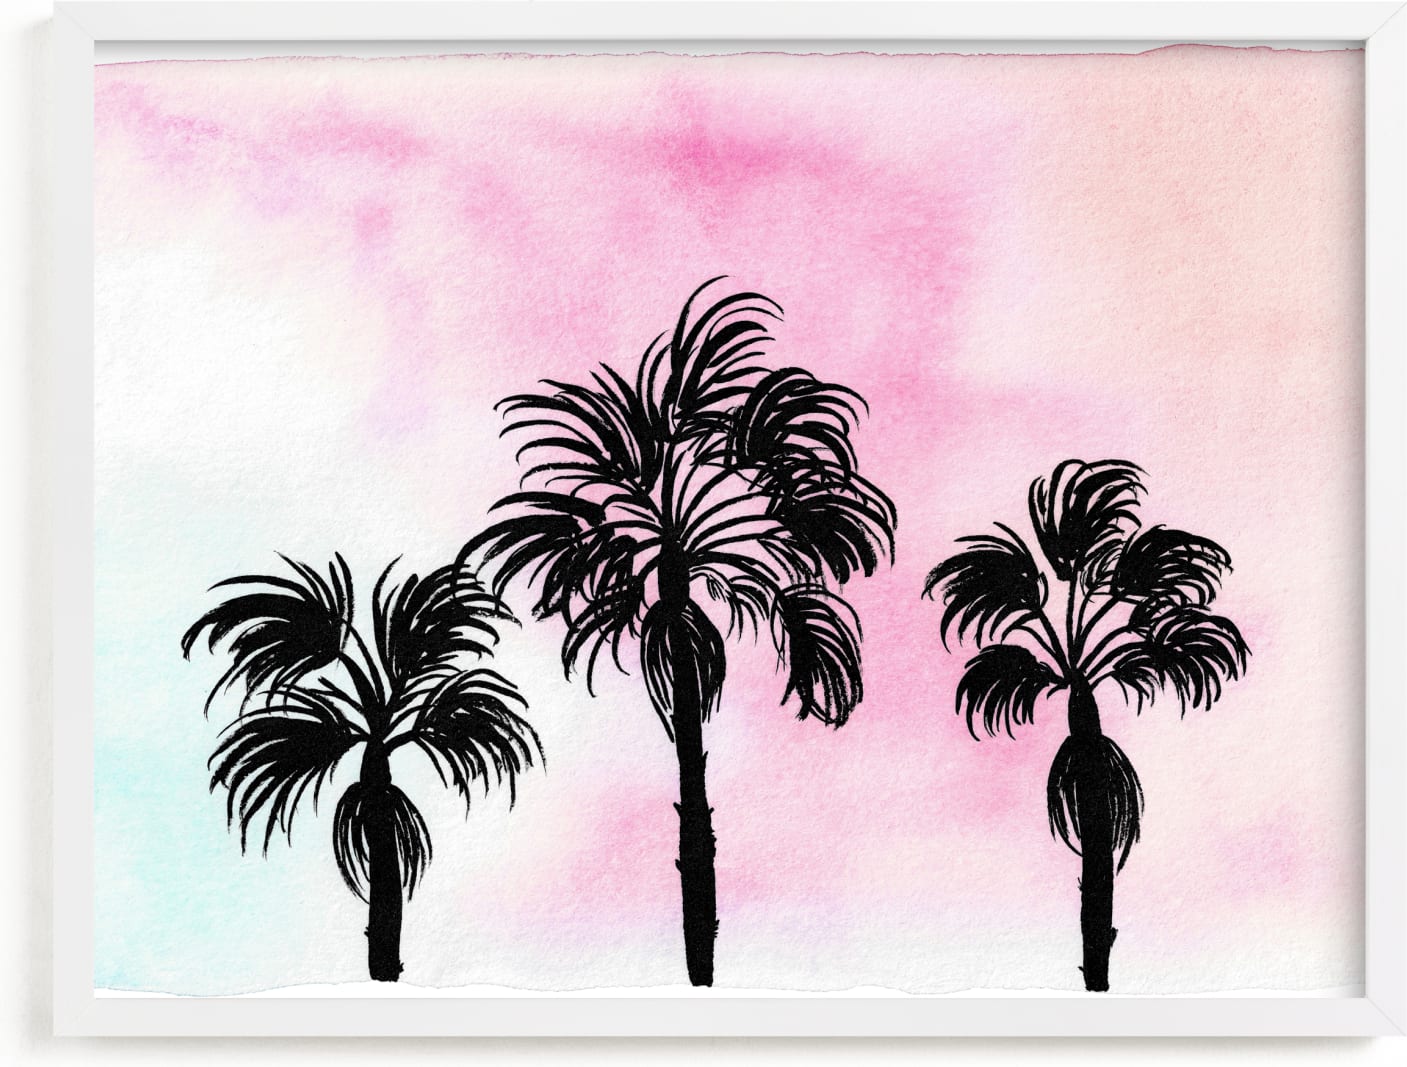 This is a pink art by Juliana Zimmermann called Sunset in L.A..